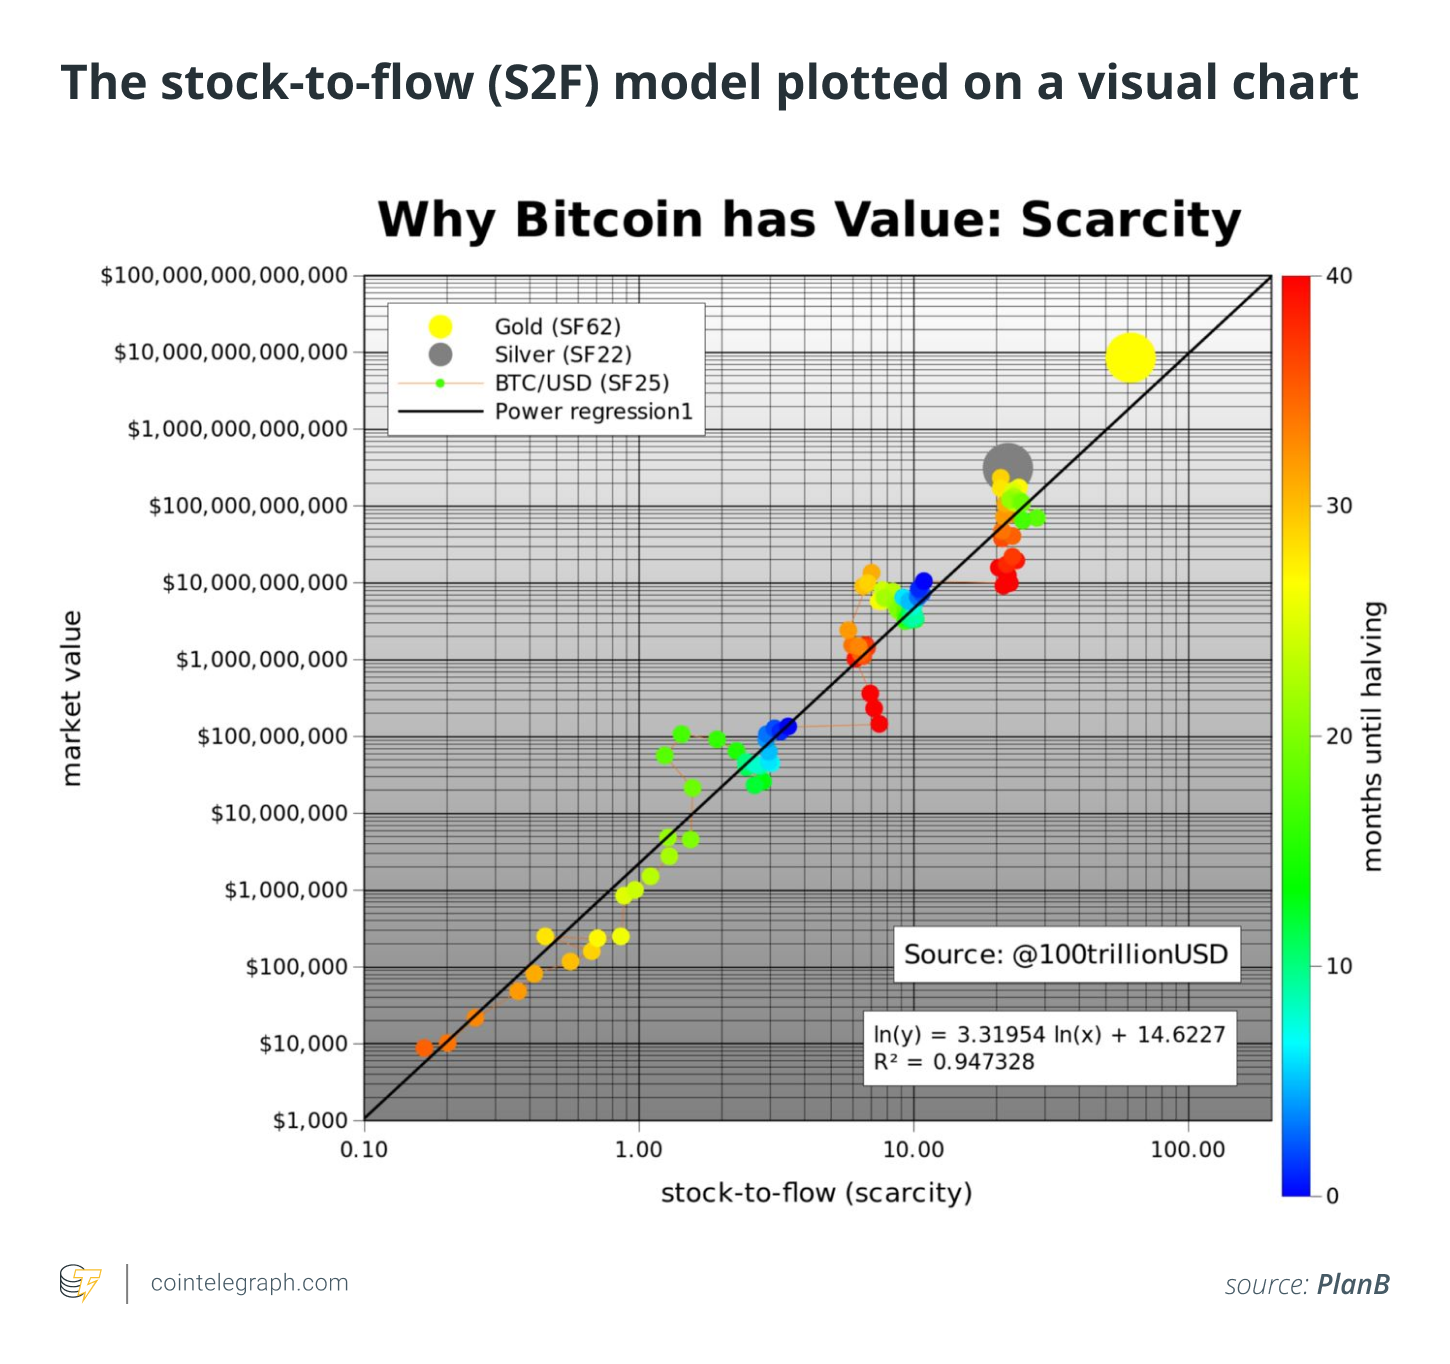 The stock-to-flow (S2F) model plotted on a visual chart